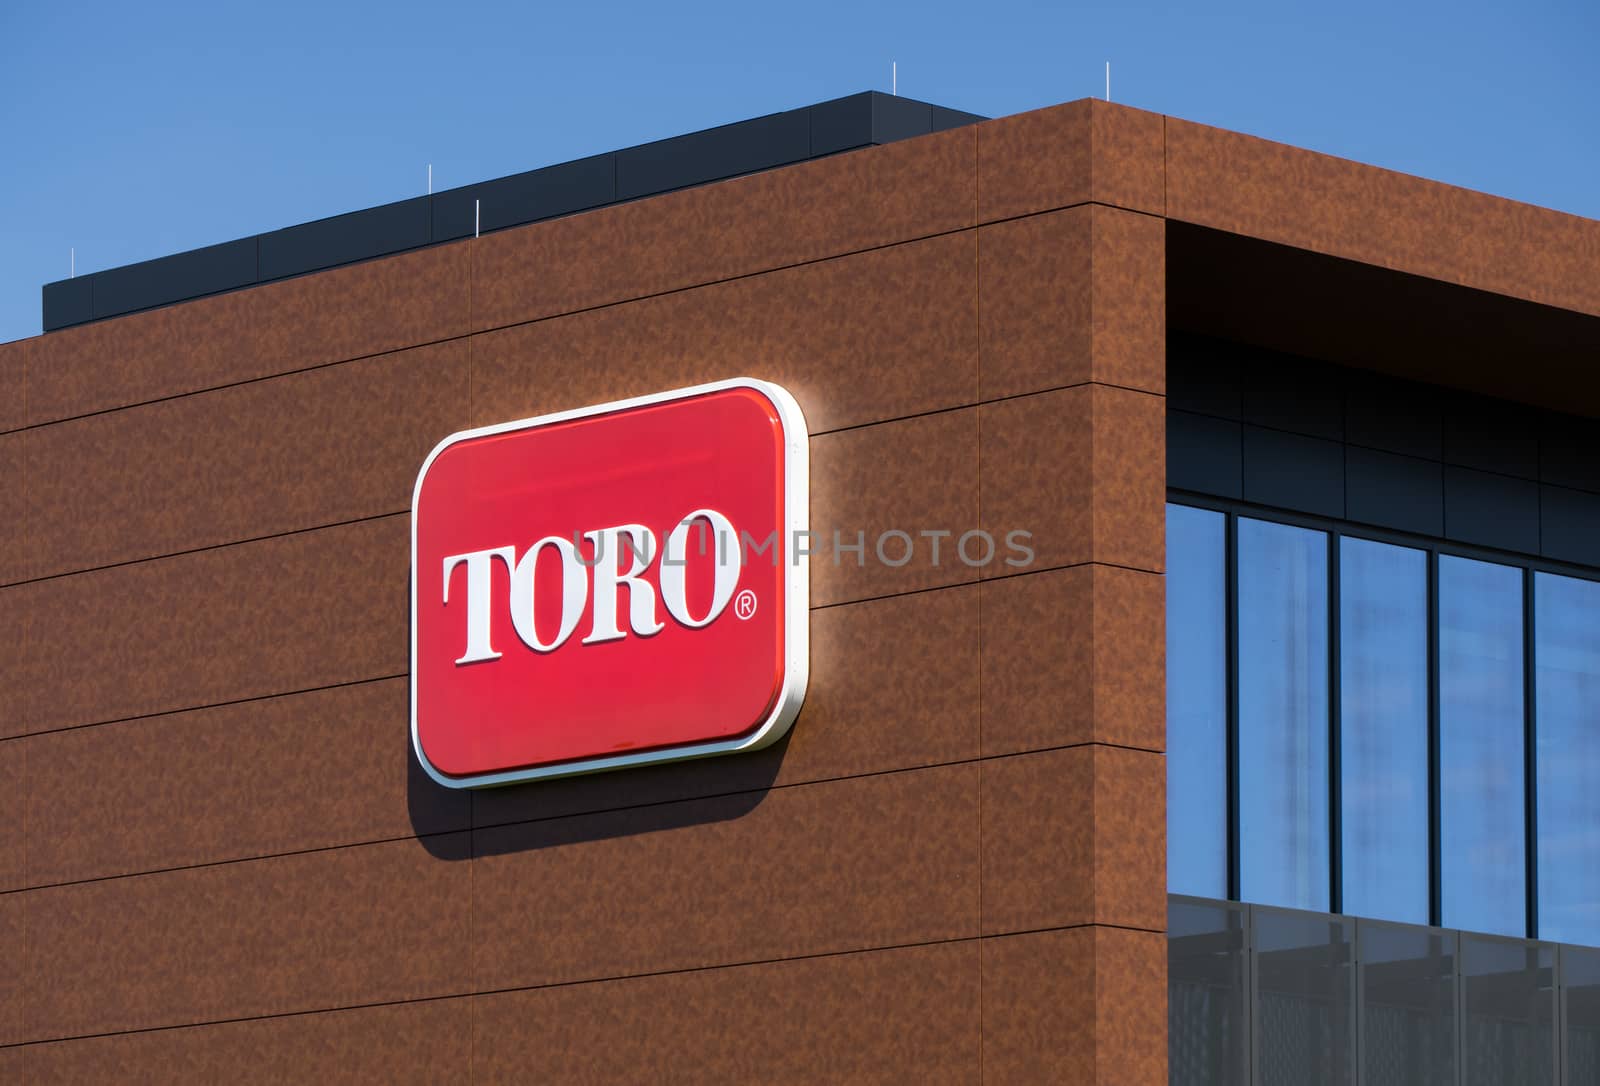 BLOOMINGTON, MN/USA - August 12, 2015: The Toro Company world headquarters. Toro is an American manufacturer of lawn mower and snow removal equipment.